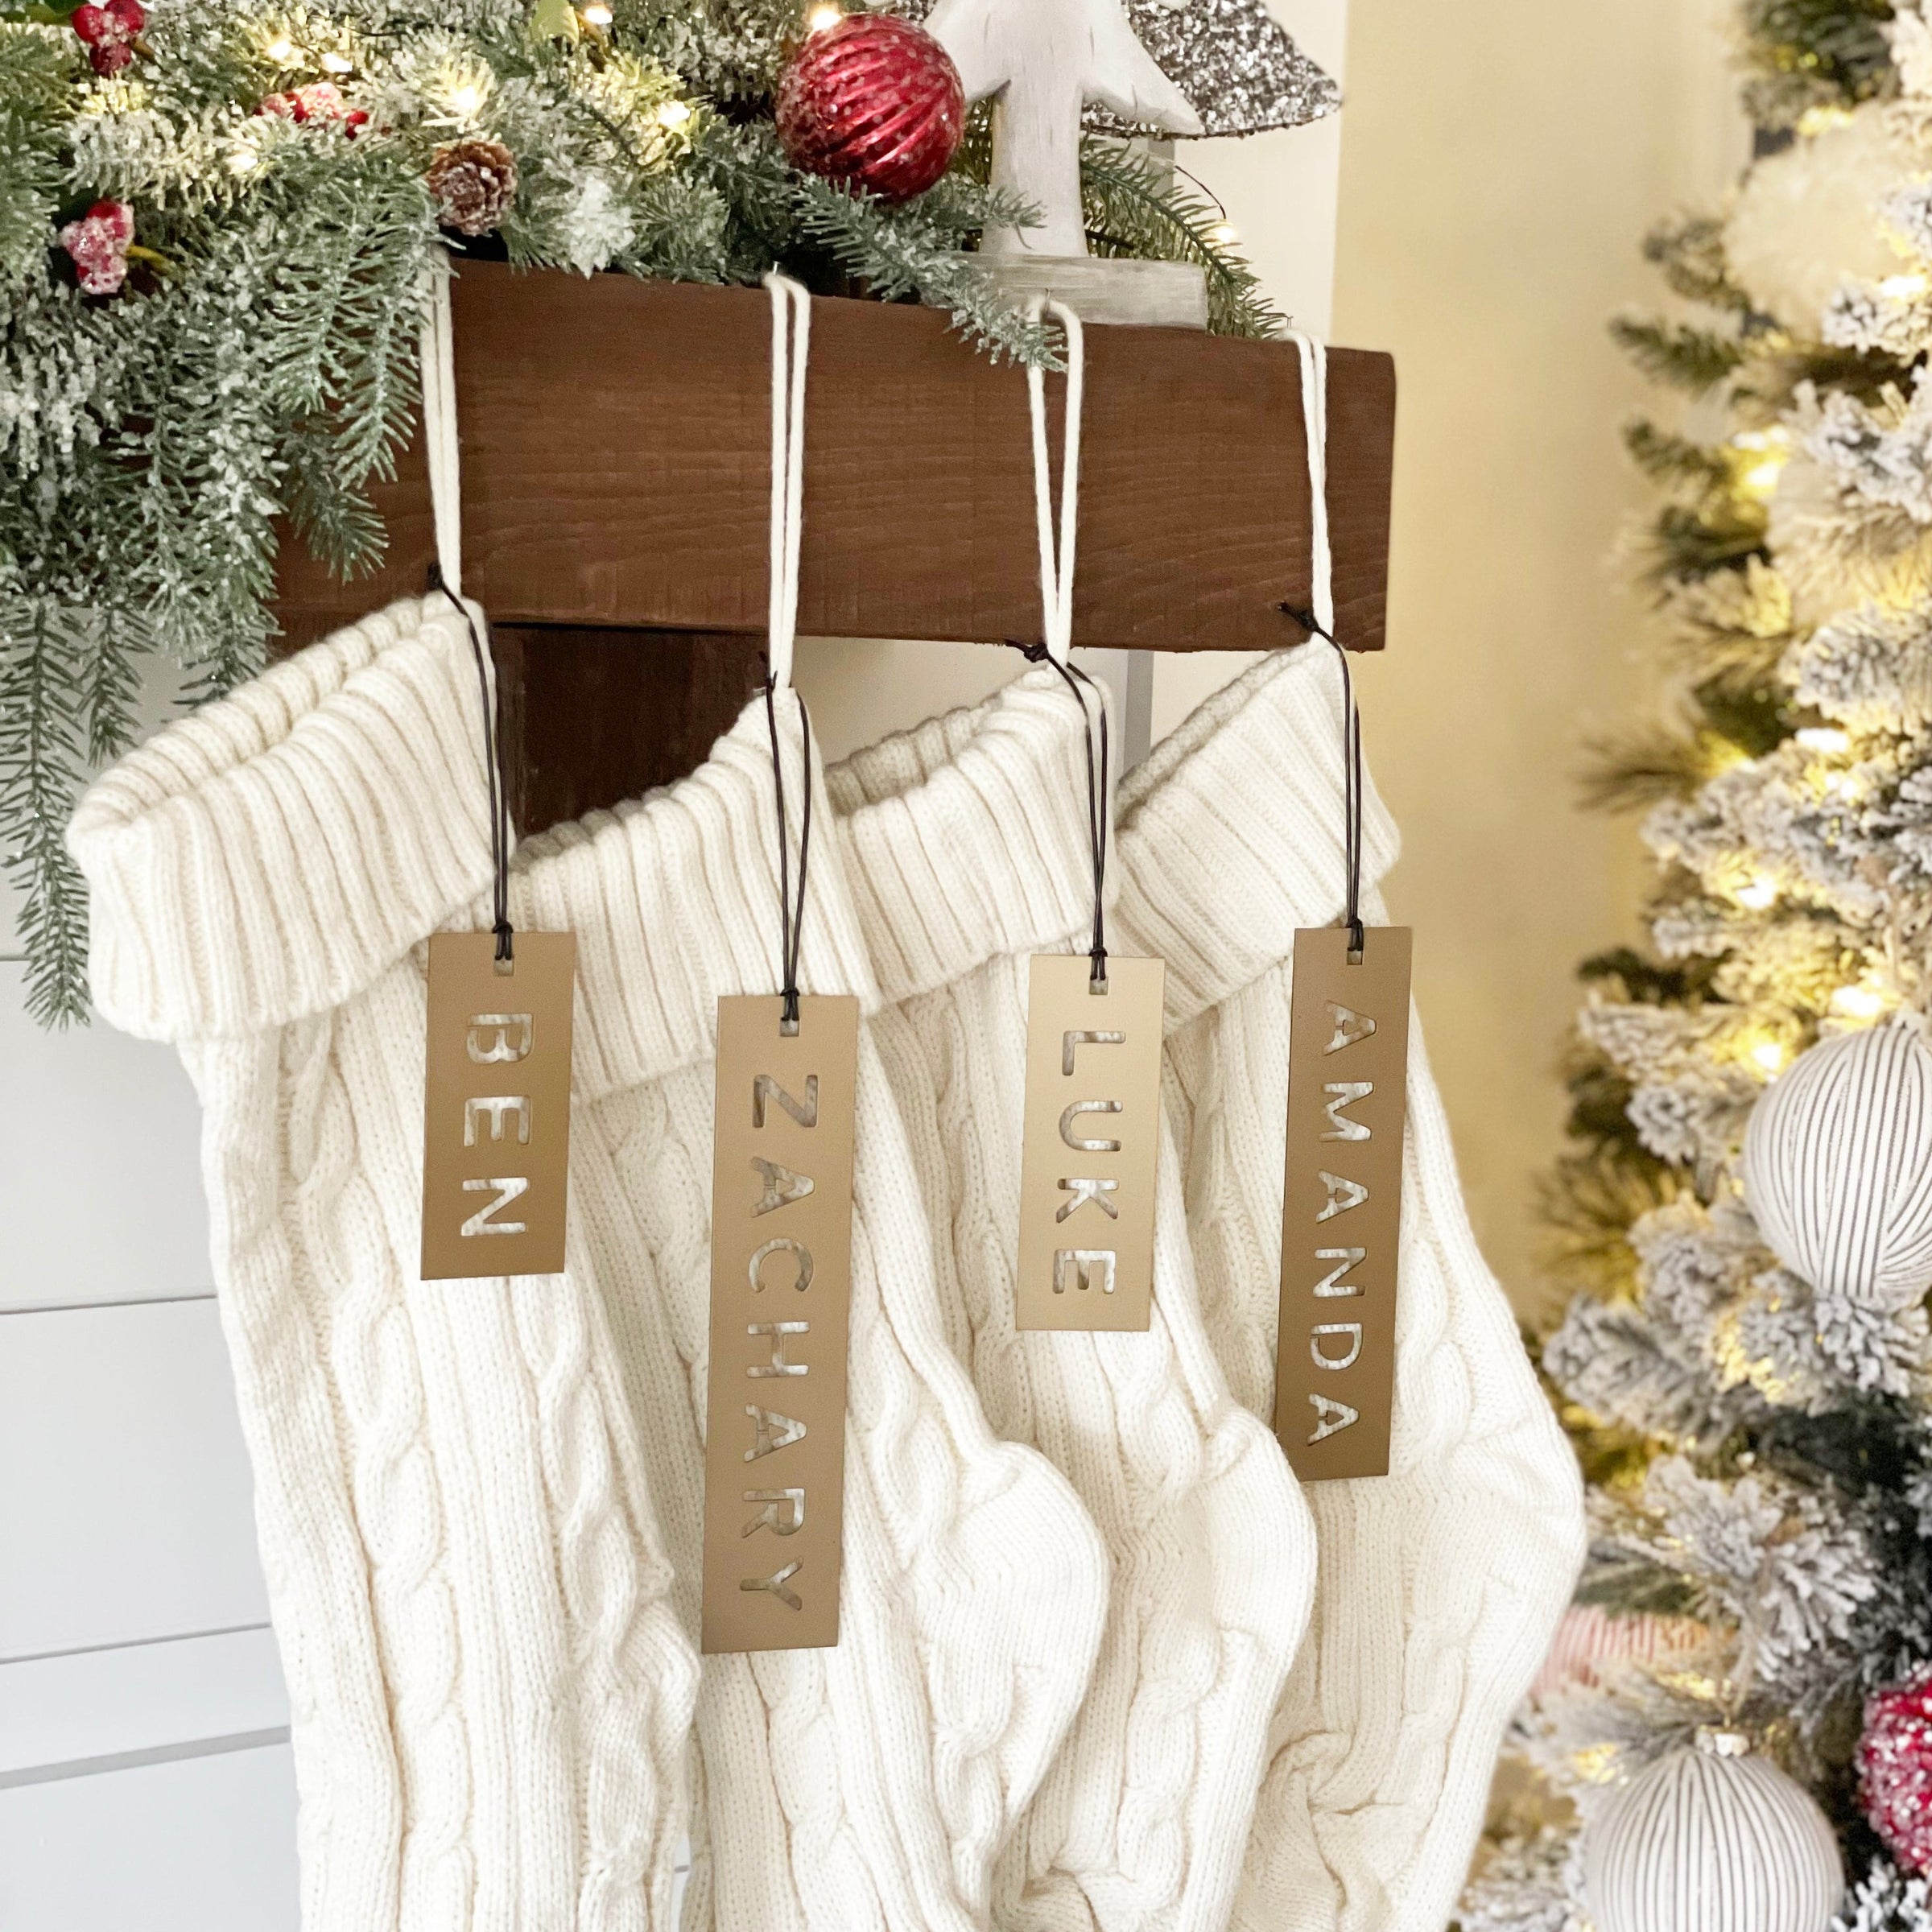 Stocking Name Tags Personalized Holiday Gift Tag Christmas Decor Large Wood  Stocking Labels